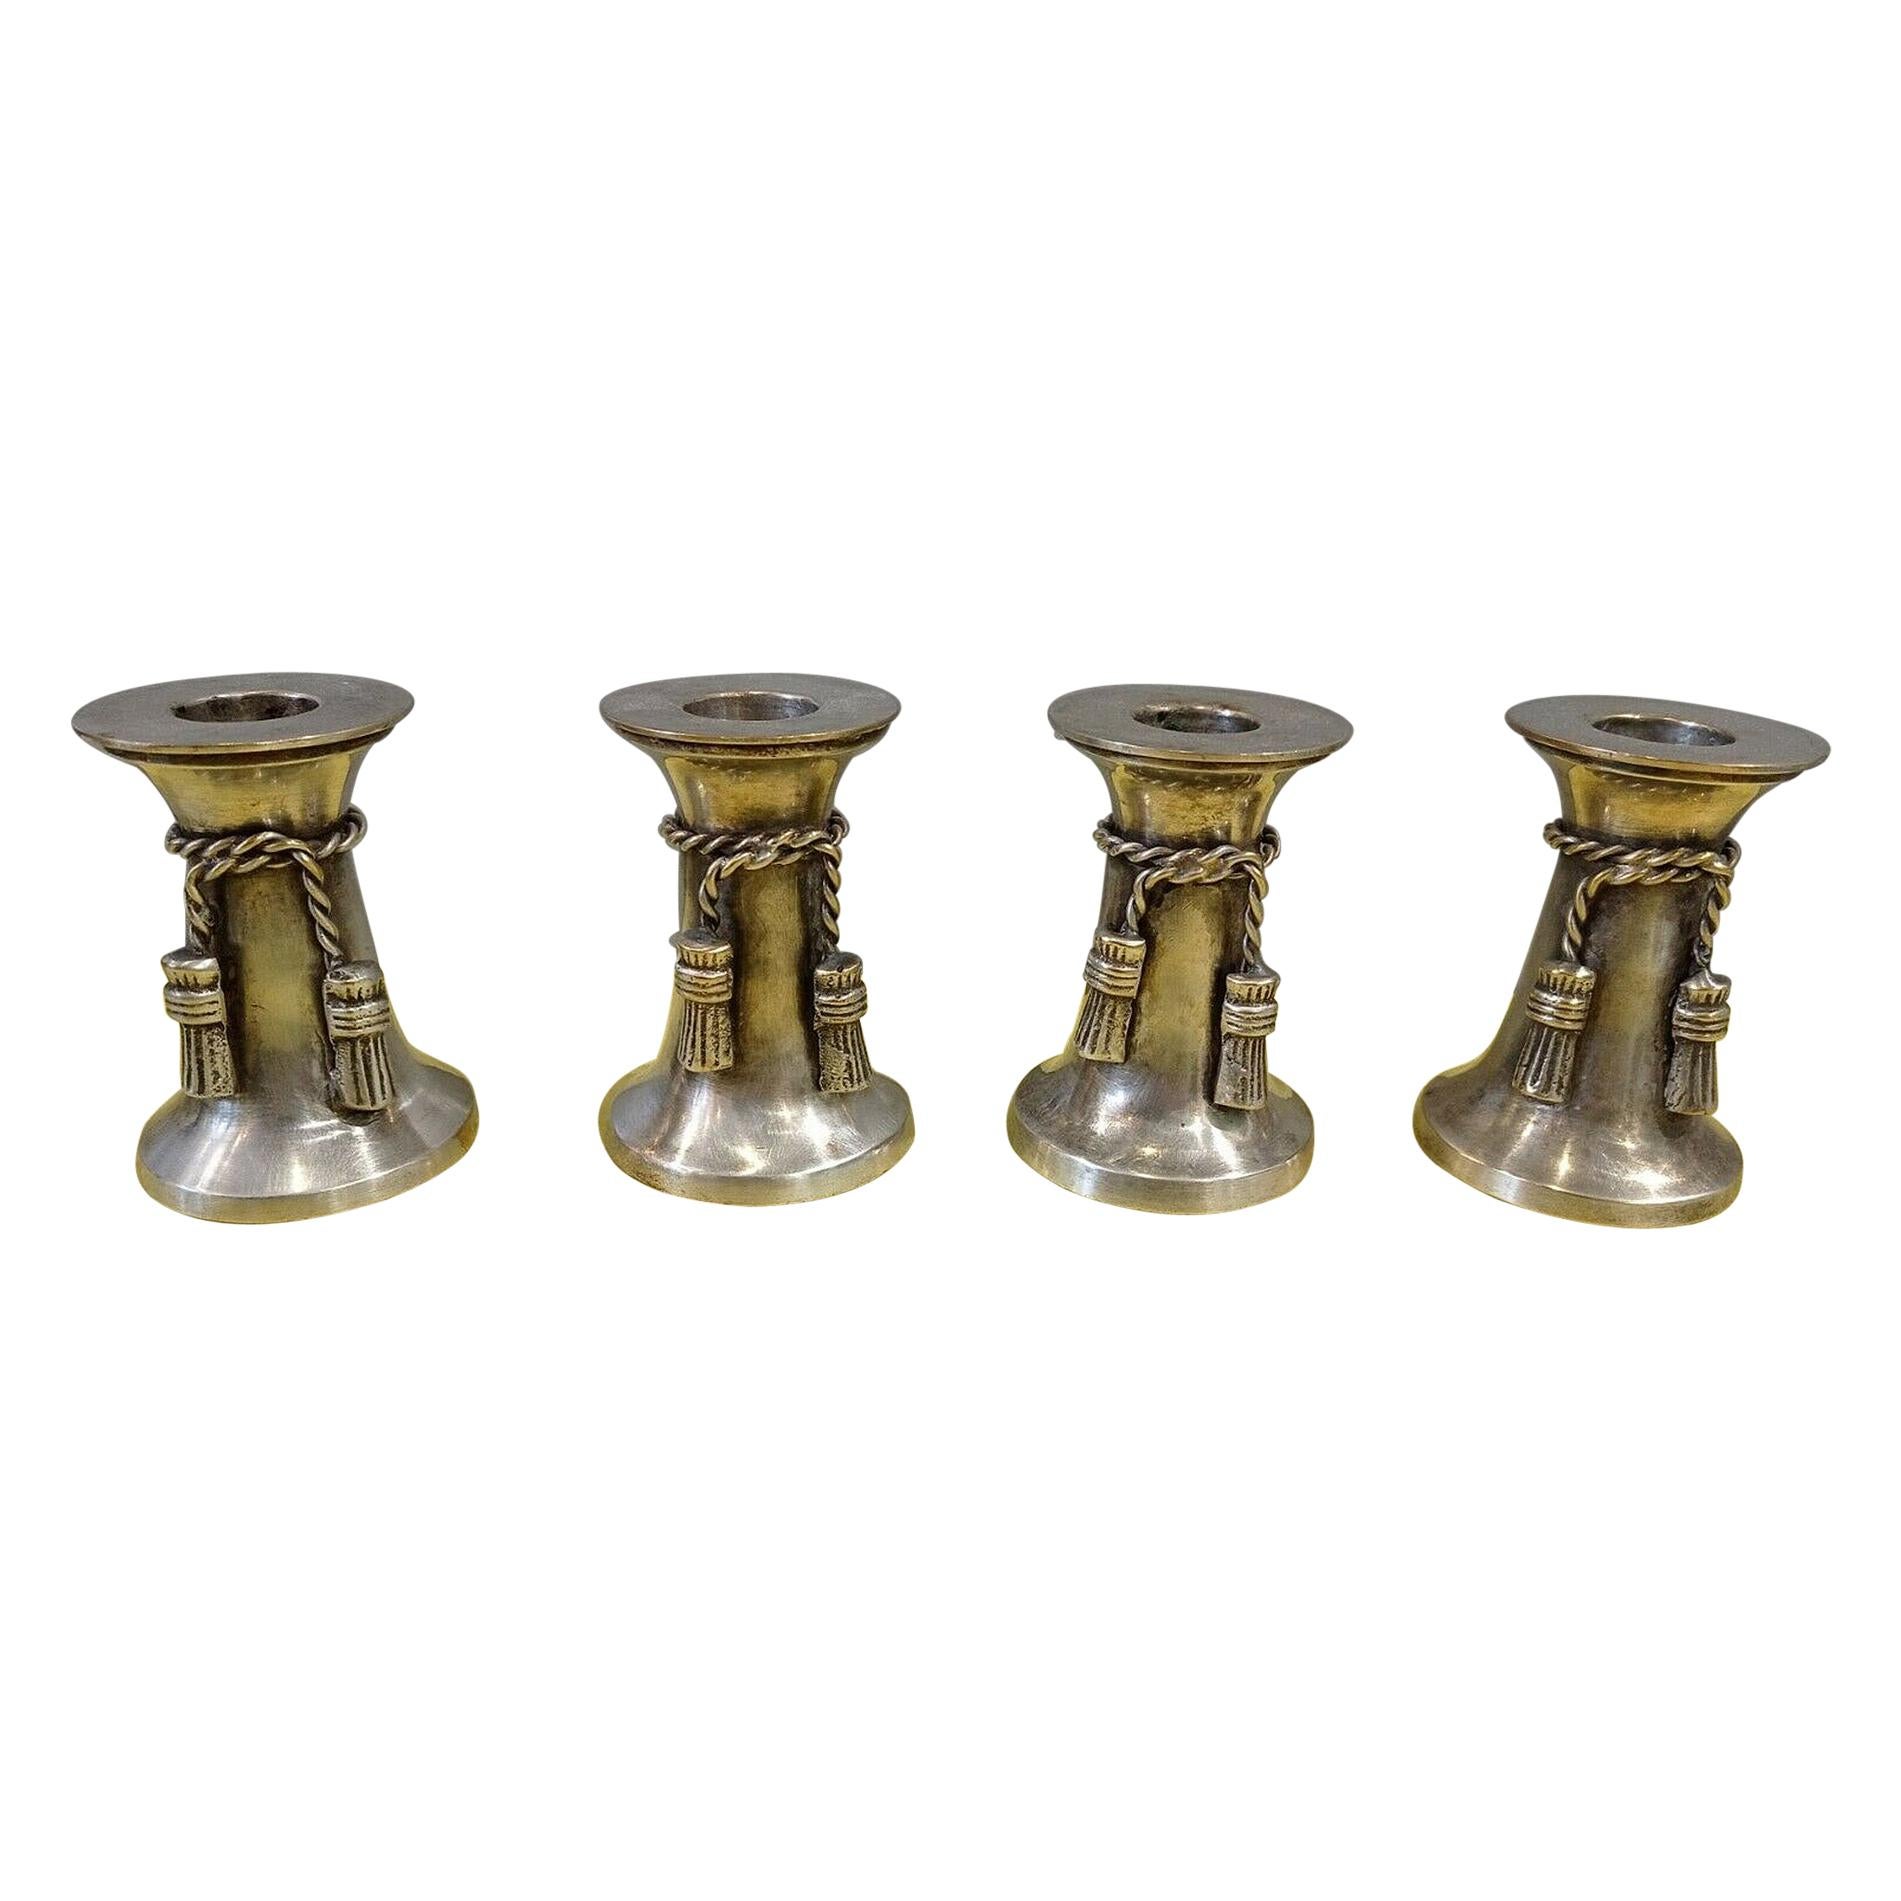 4 Small Silver-Plated Candlesticks with a Very Beautiful Decoration of Cords